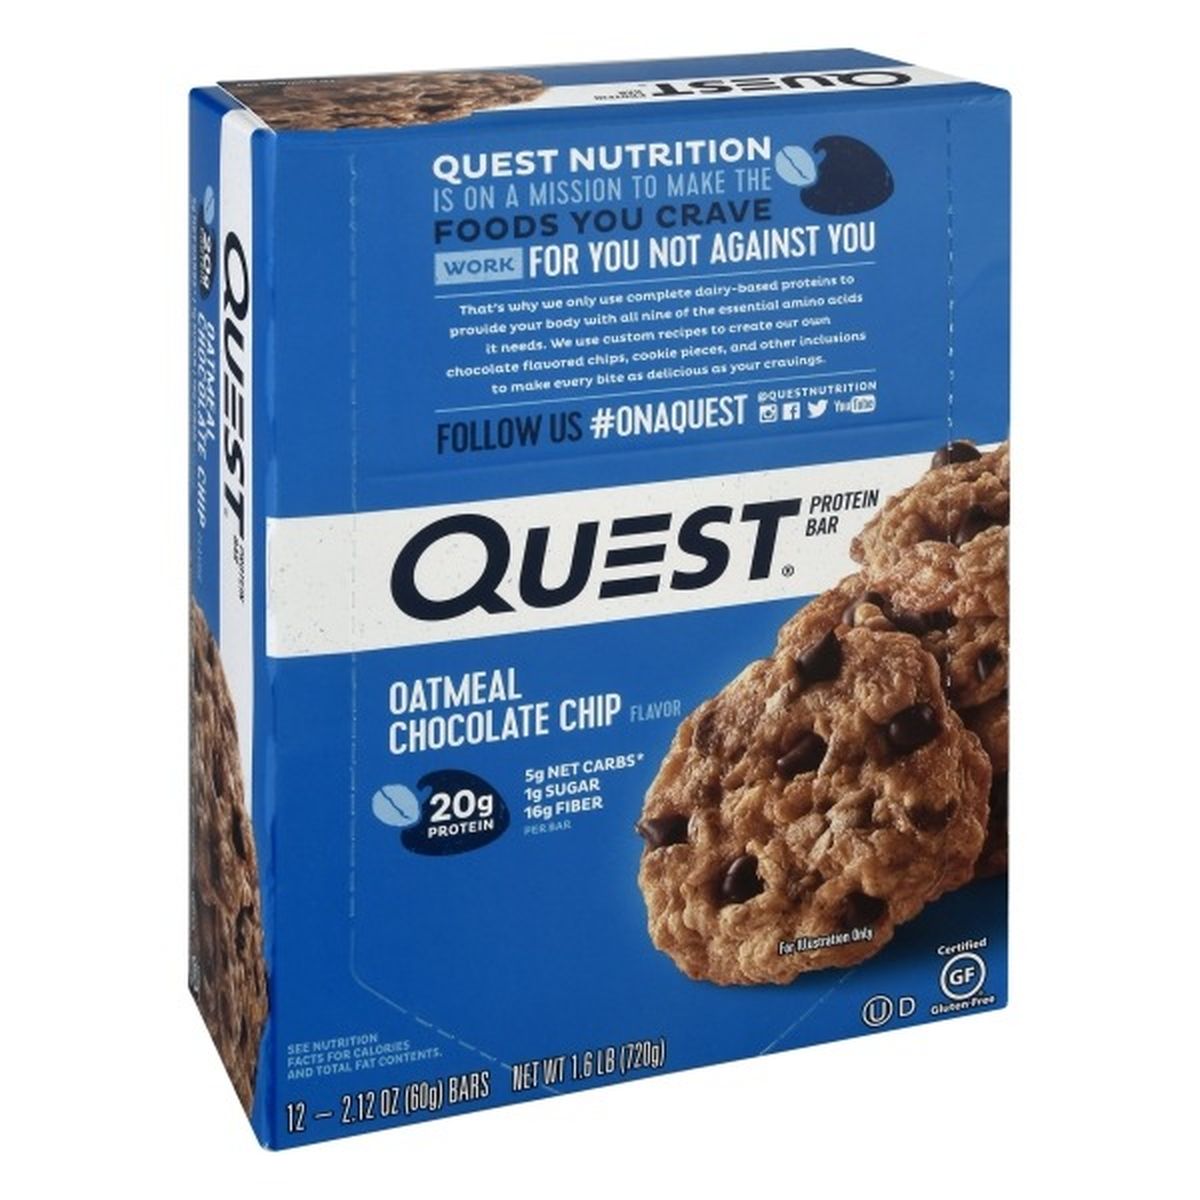 Calories in Quest Protein Bar, Oatmeal Chocolate Chip Flavor